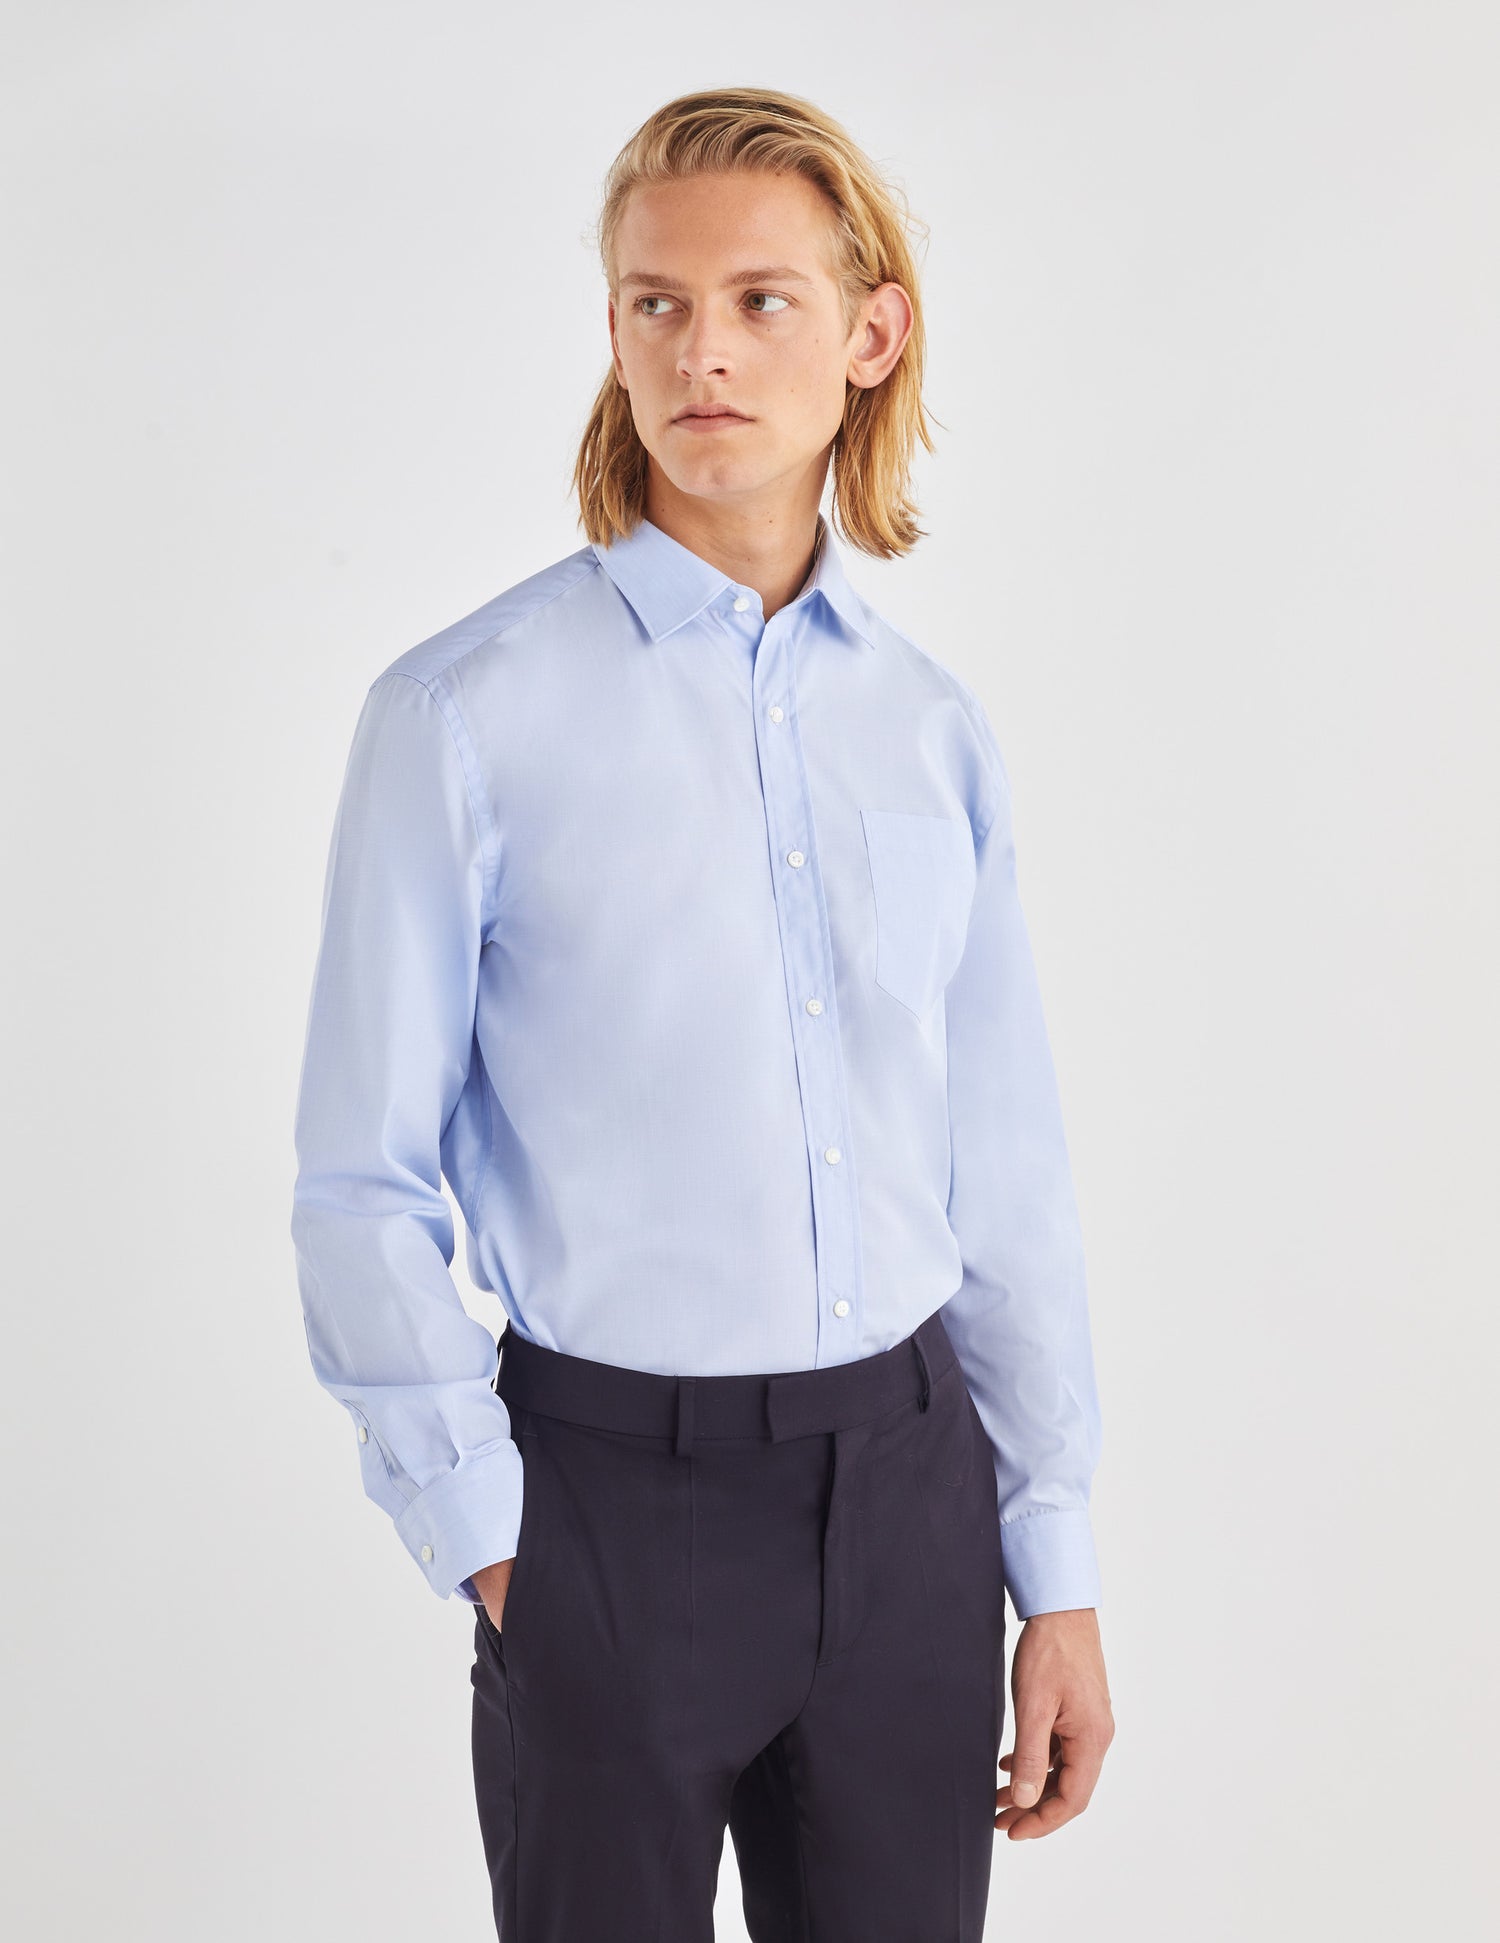 Classic blue wrinkle-free shirt - Wire to wire - Figaret Collar#2